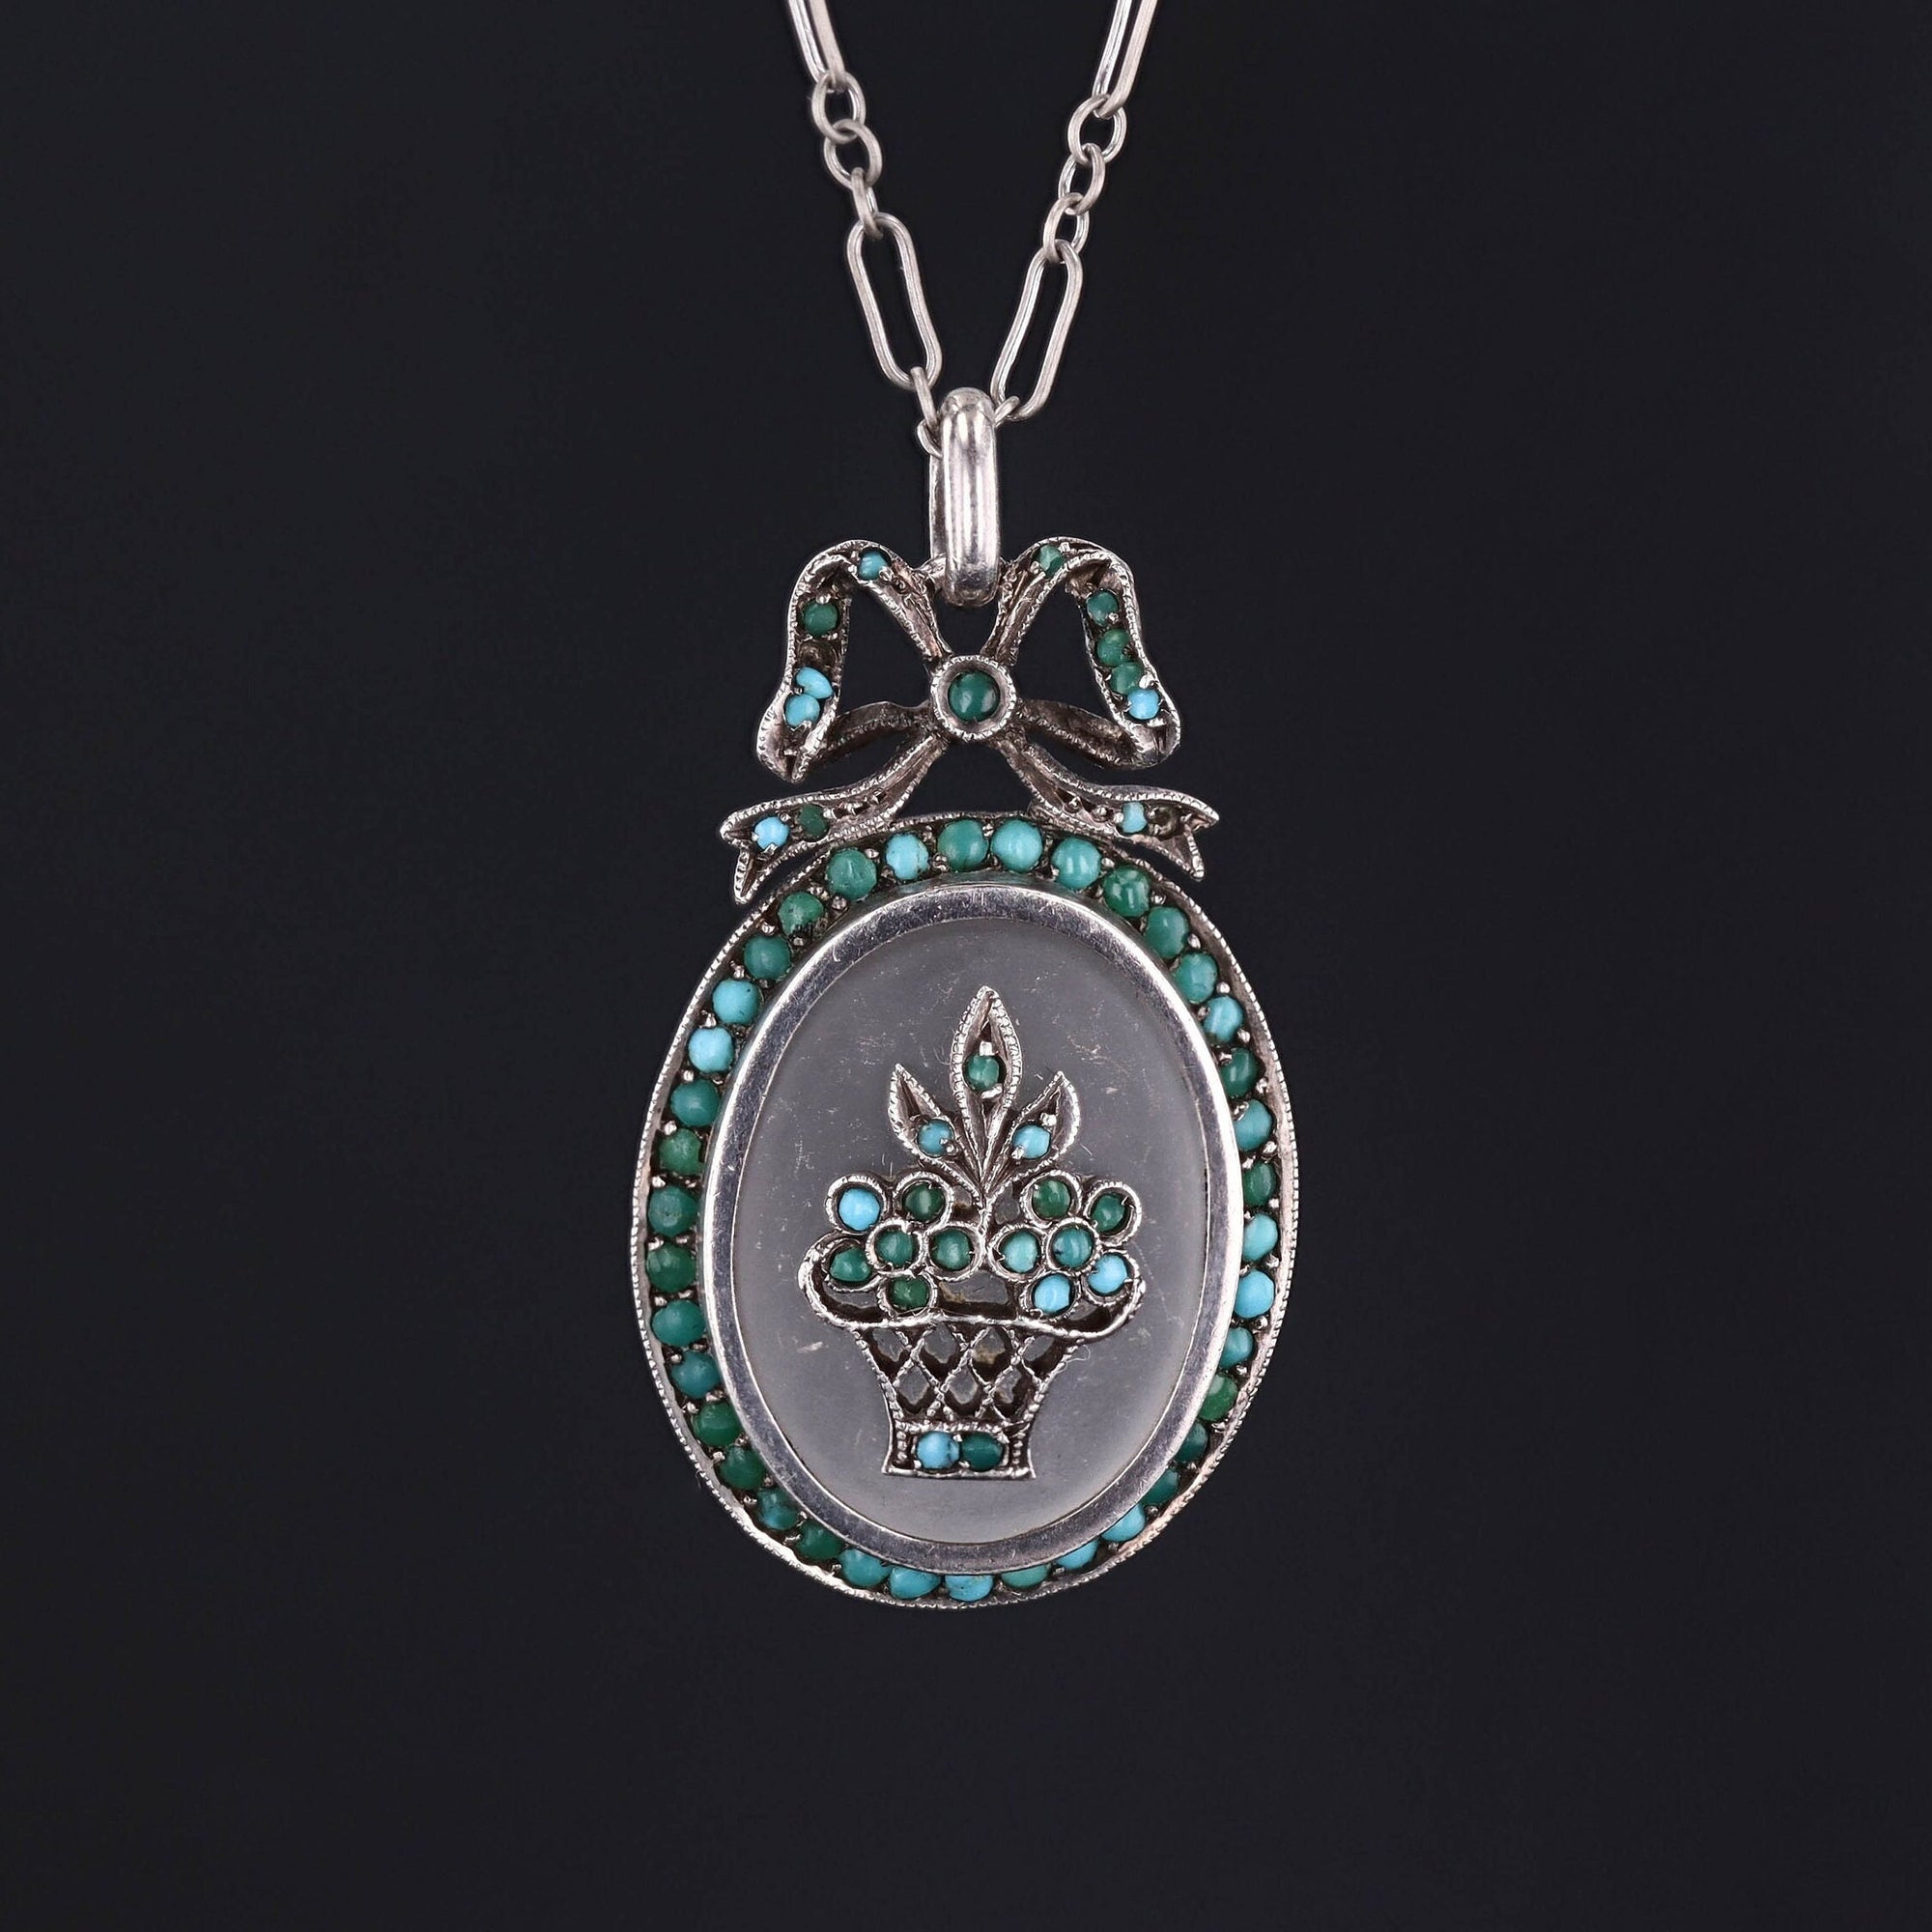 Flower Basket Necklace | Silver, Turquoise & Frosted Rock Crystal Pendant 